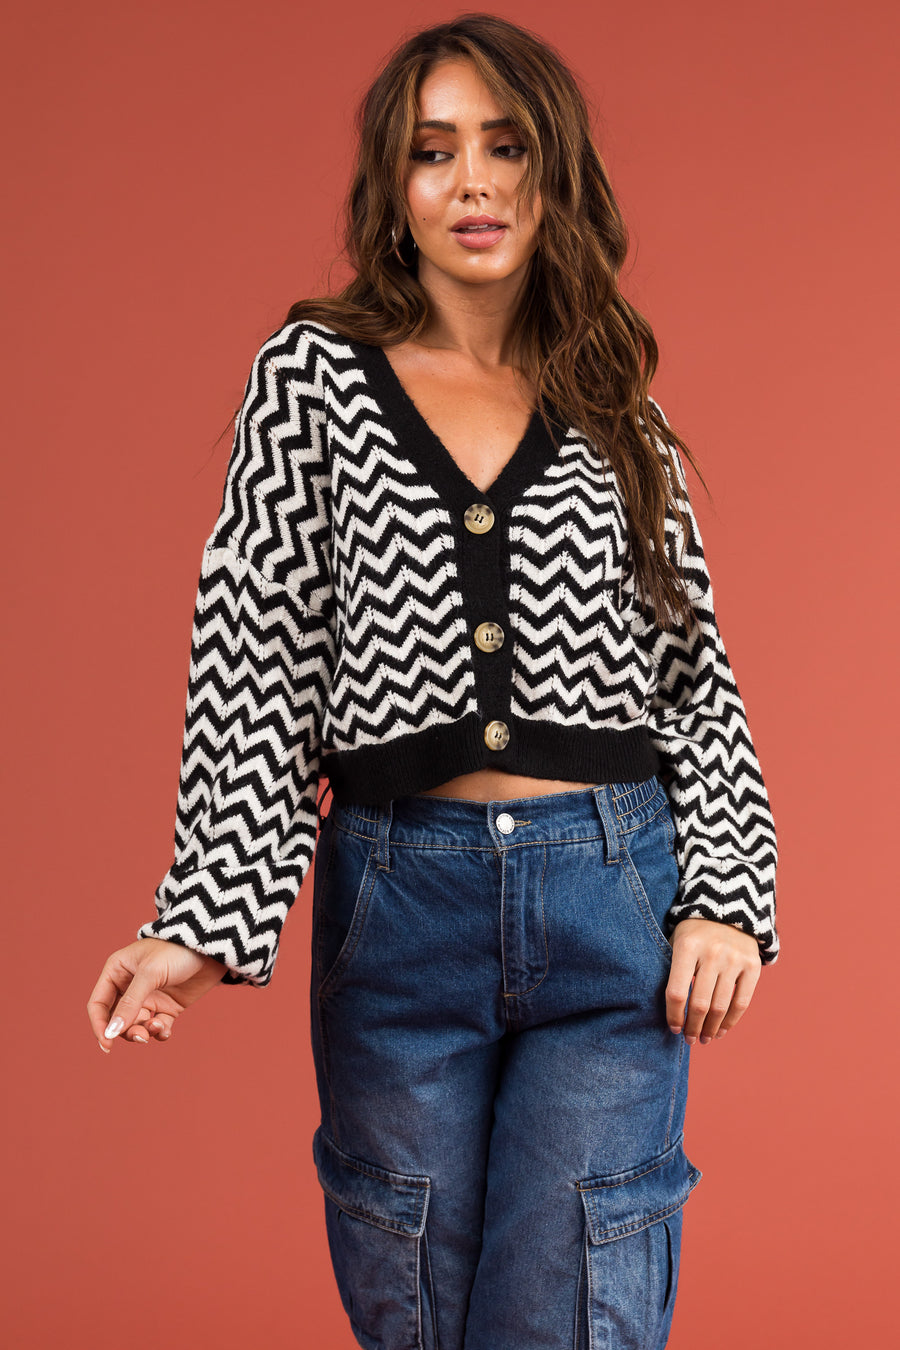 Black and White Chevron Printed Buttoned Cardigan